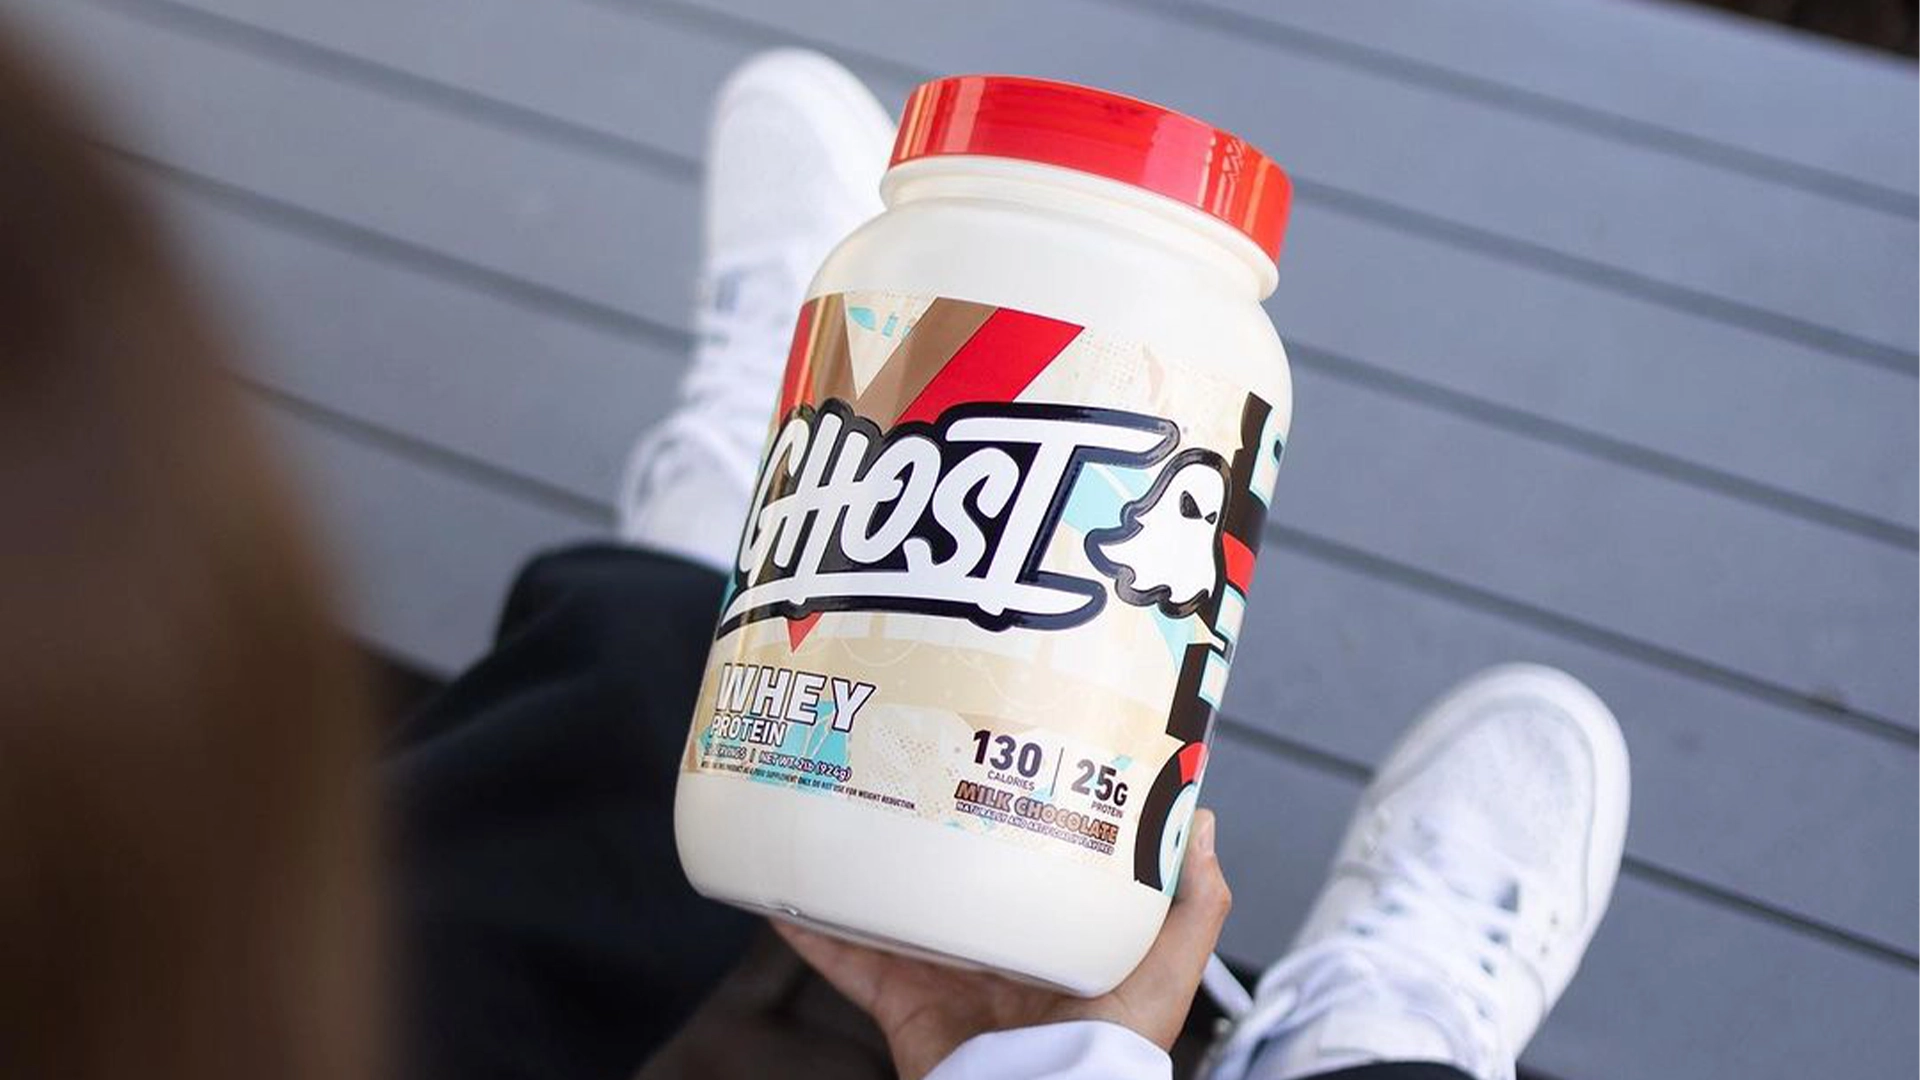 Person holding a tub of Ghost Whey 